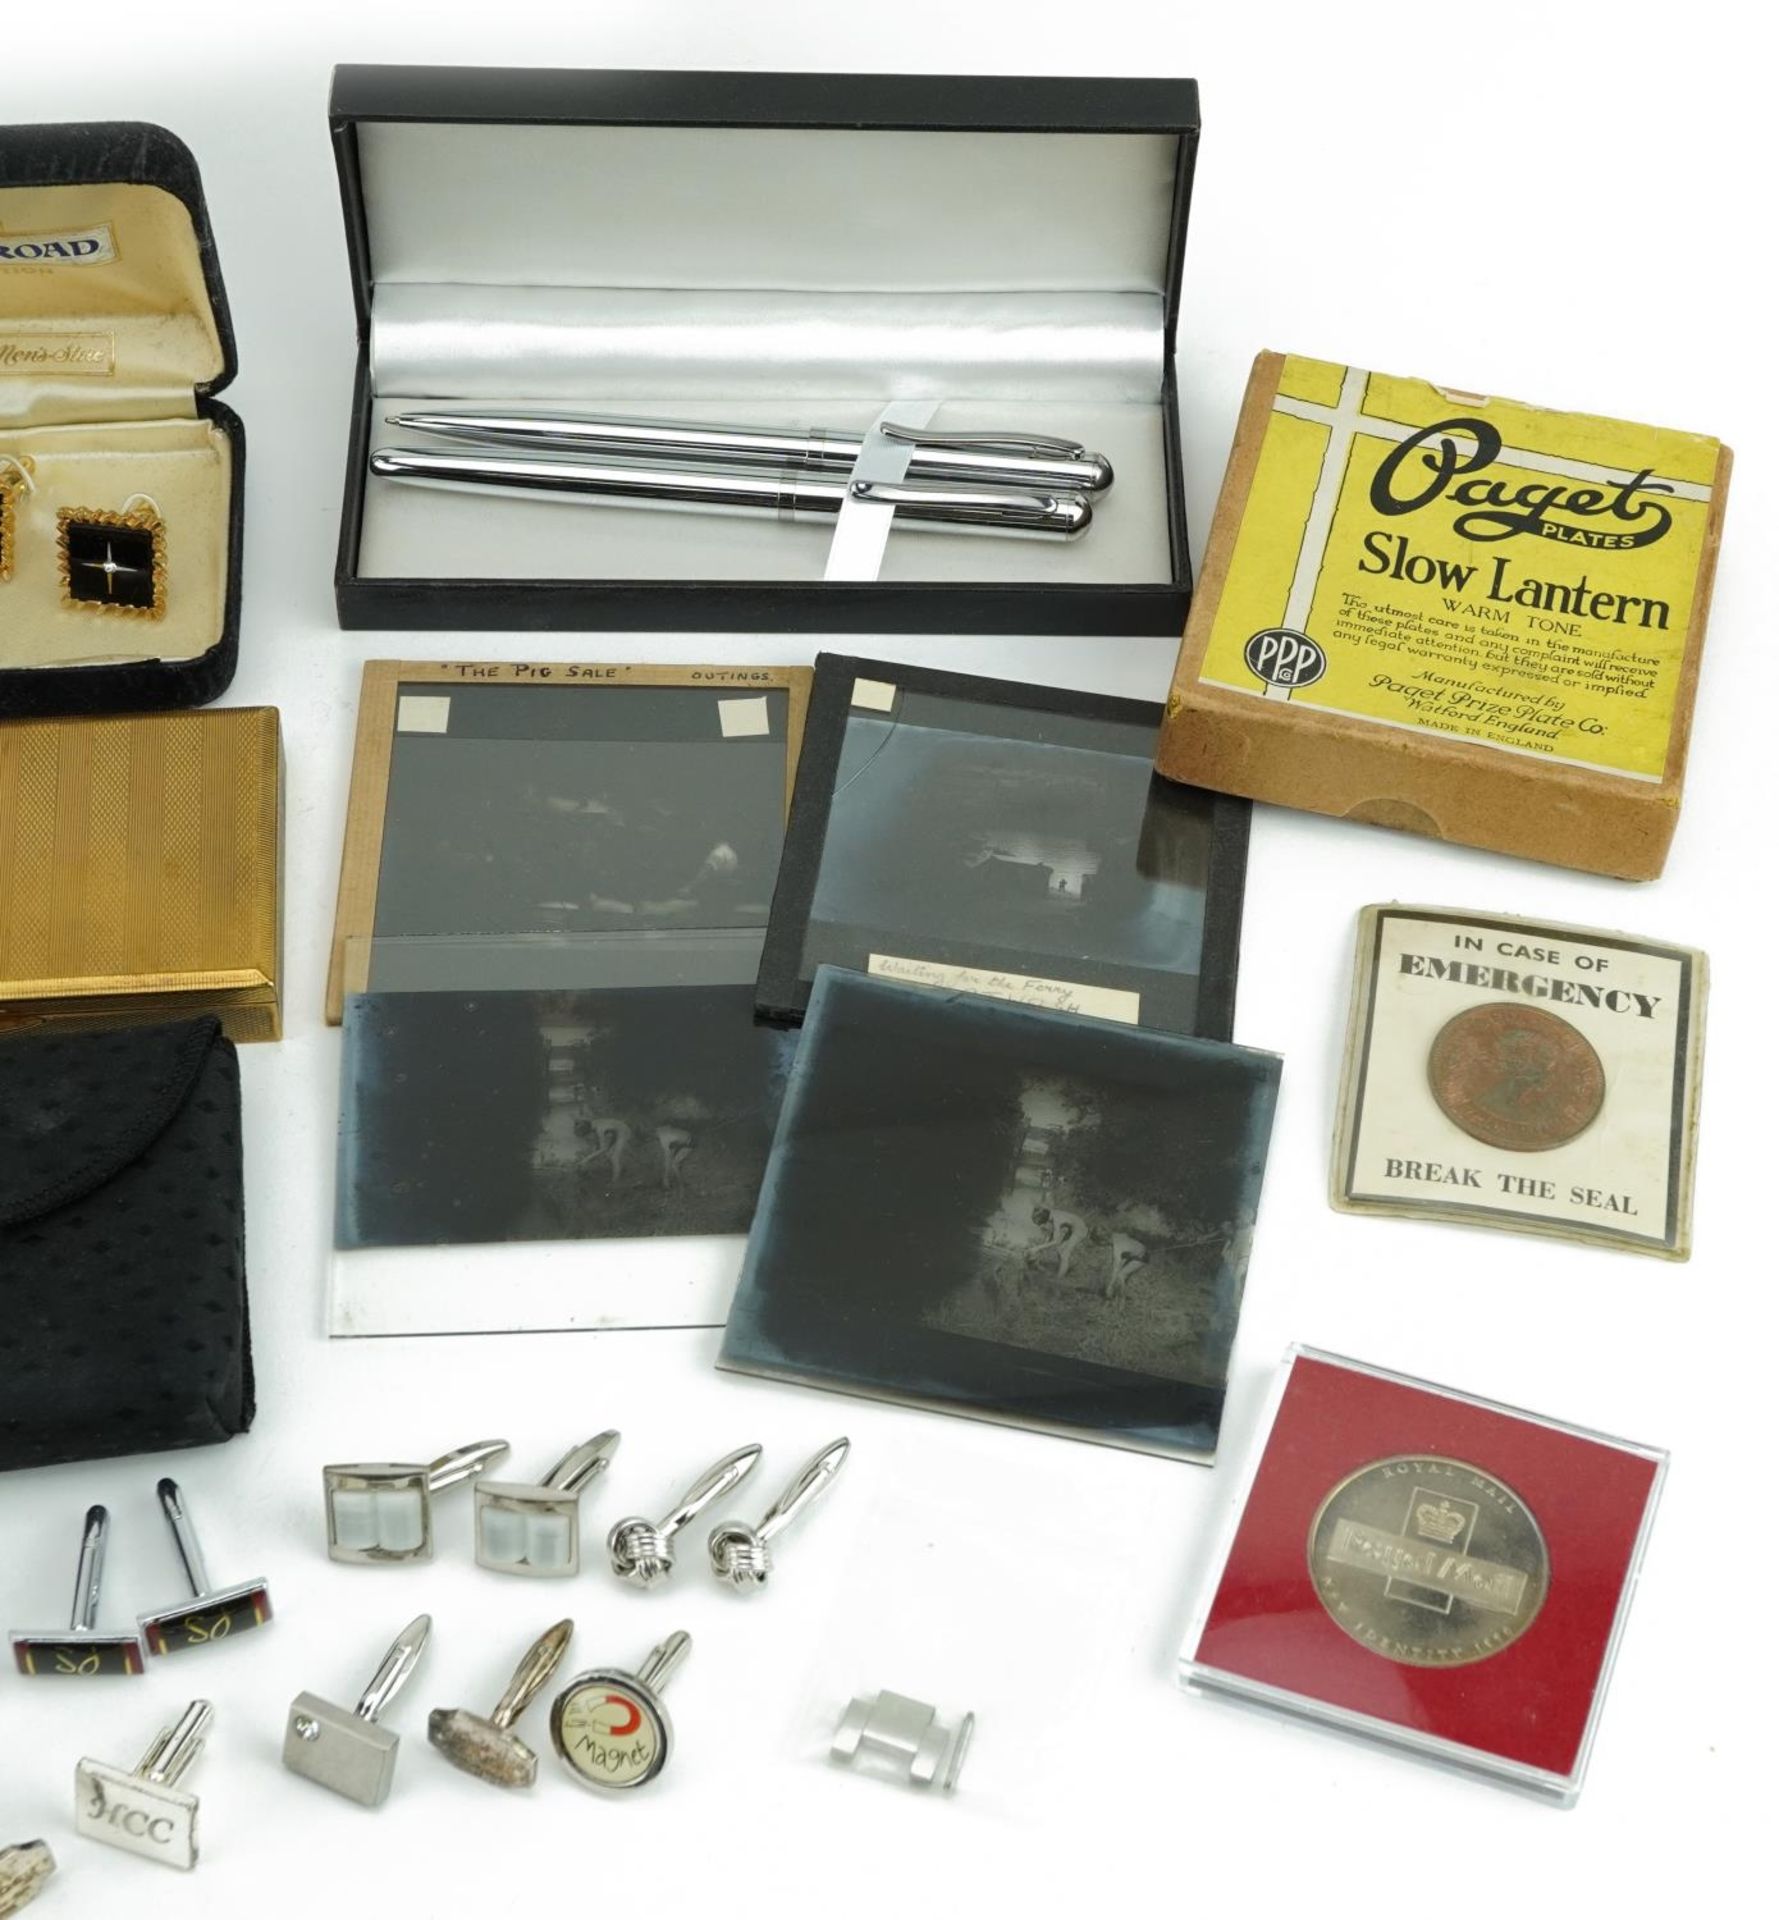 Sundry items including pens, wristwatches, cufflinks and Reuge Stratton compact : For further - Image 3 of 7